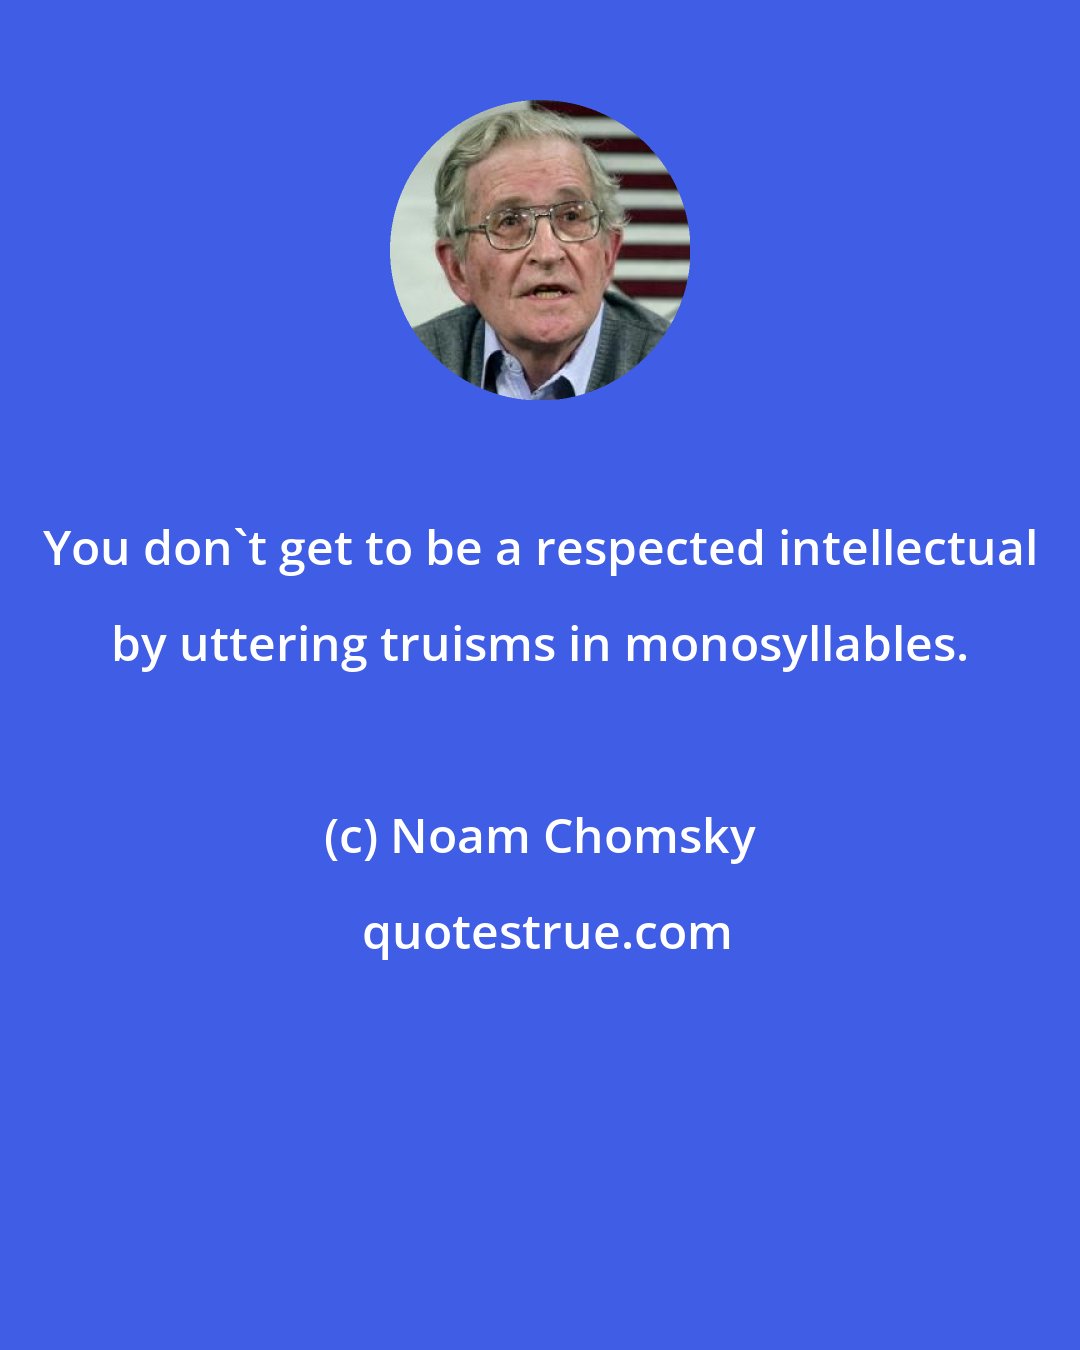 Noam Chomsky: You don't get to be a respected intellectual by uttering truisms in monosyllables.